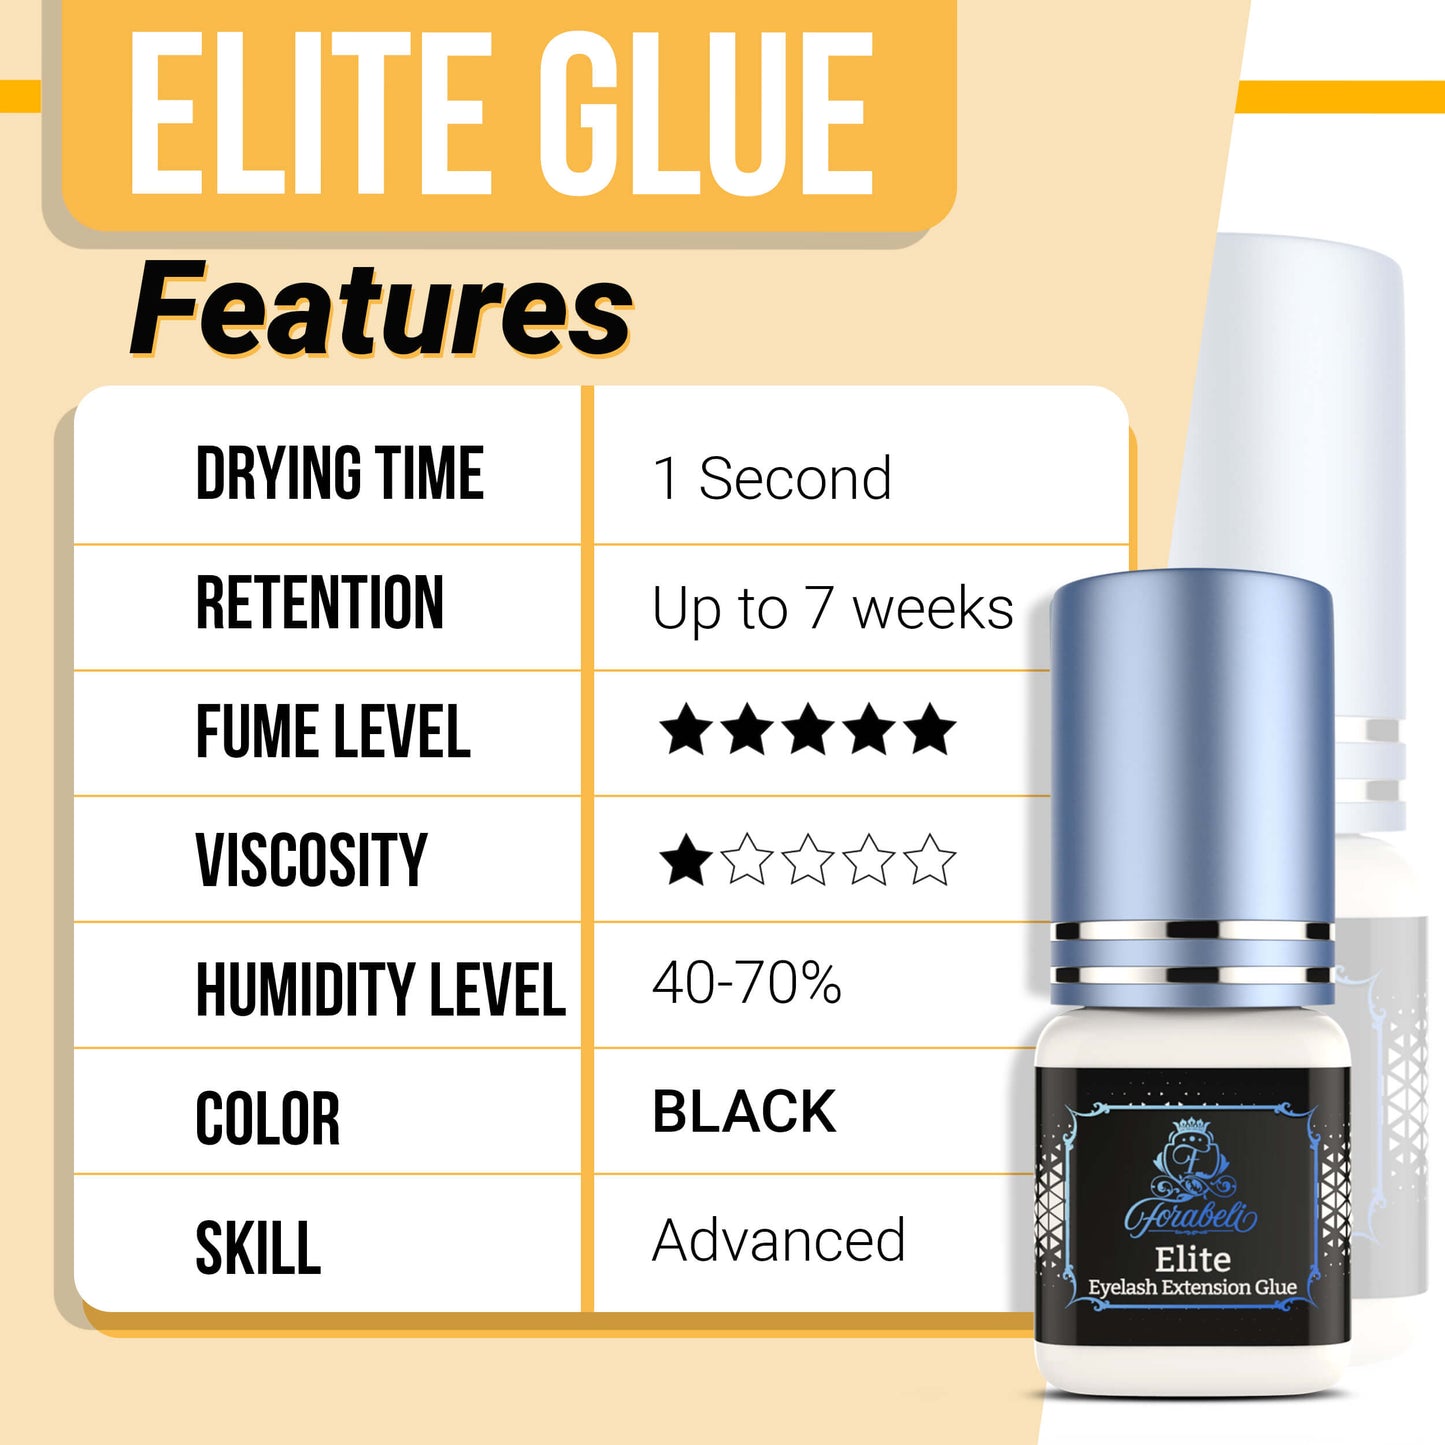 Elite eyelash extension adhesive with rapid drying time (1 second), impressive retention up to 7 weeks, low fume for minimized reaction risk, thin viscosity for a natural look, optimal performance in 40-70% relative humidity and 70-74°F (21-23°C), classic black color, designed for 2-3 years of expertise, water & sweat-resistant formula. Free from latex, cruelty, and formaldehyde.